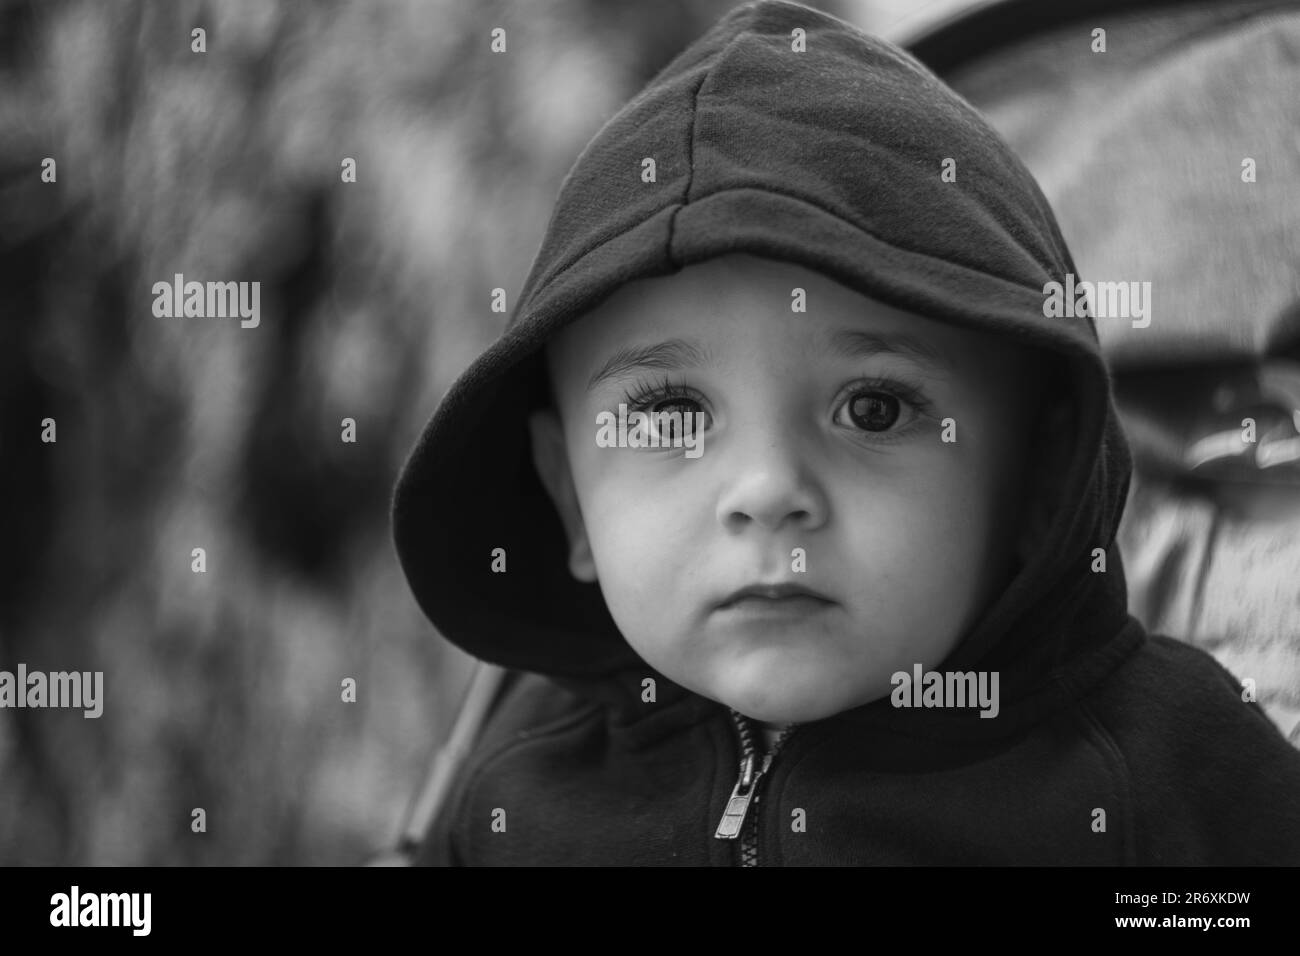 black and white portrait of a toddler in a hooded jumper Stock Photo